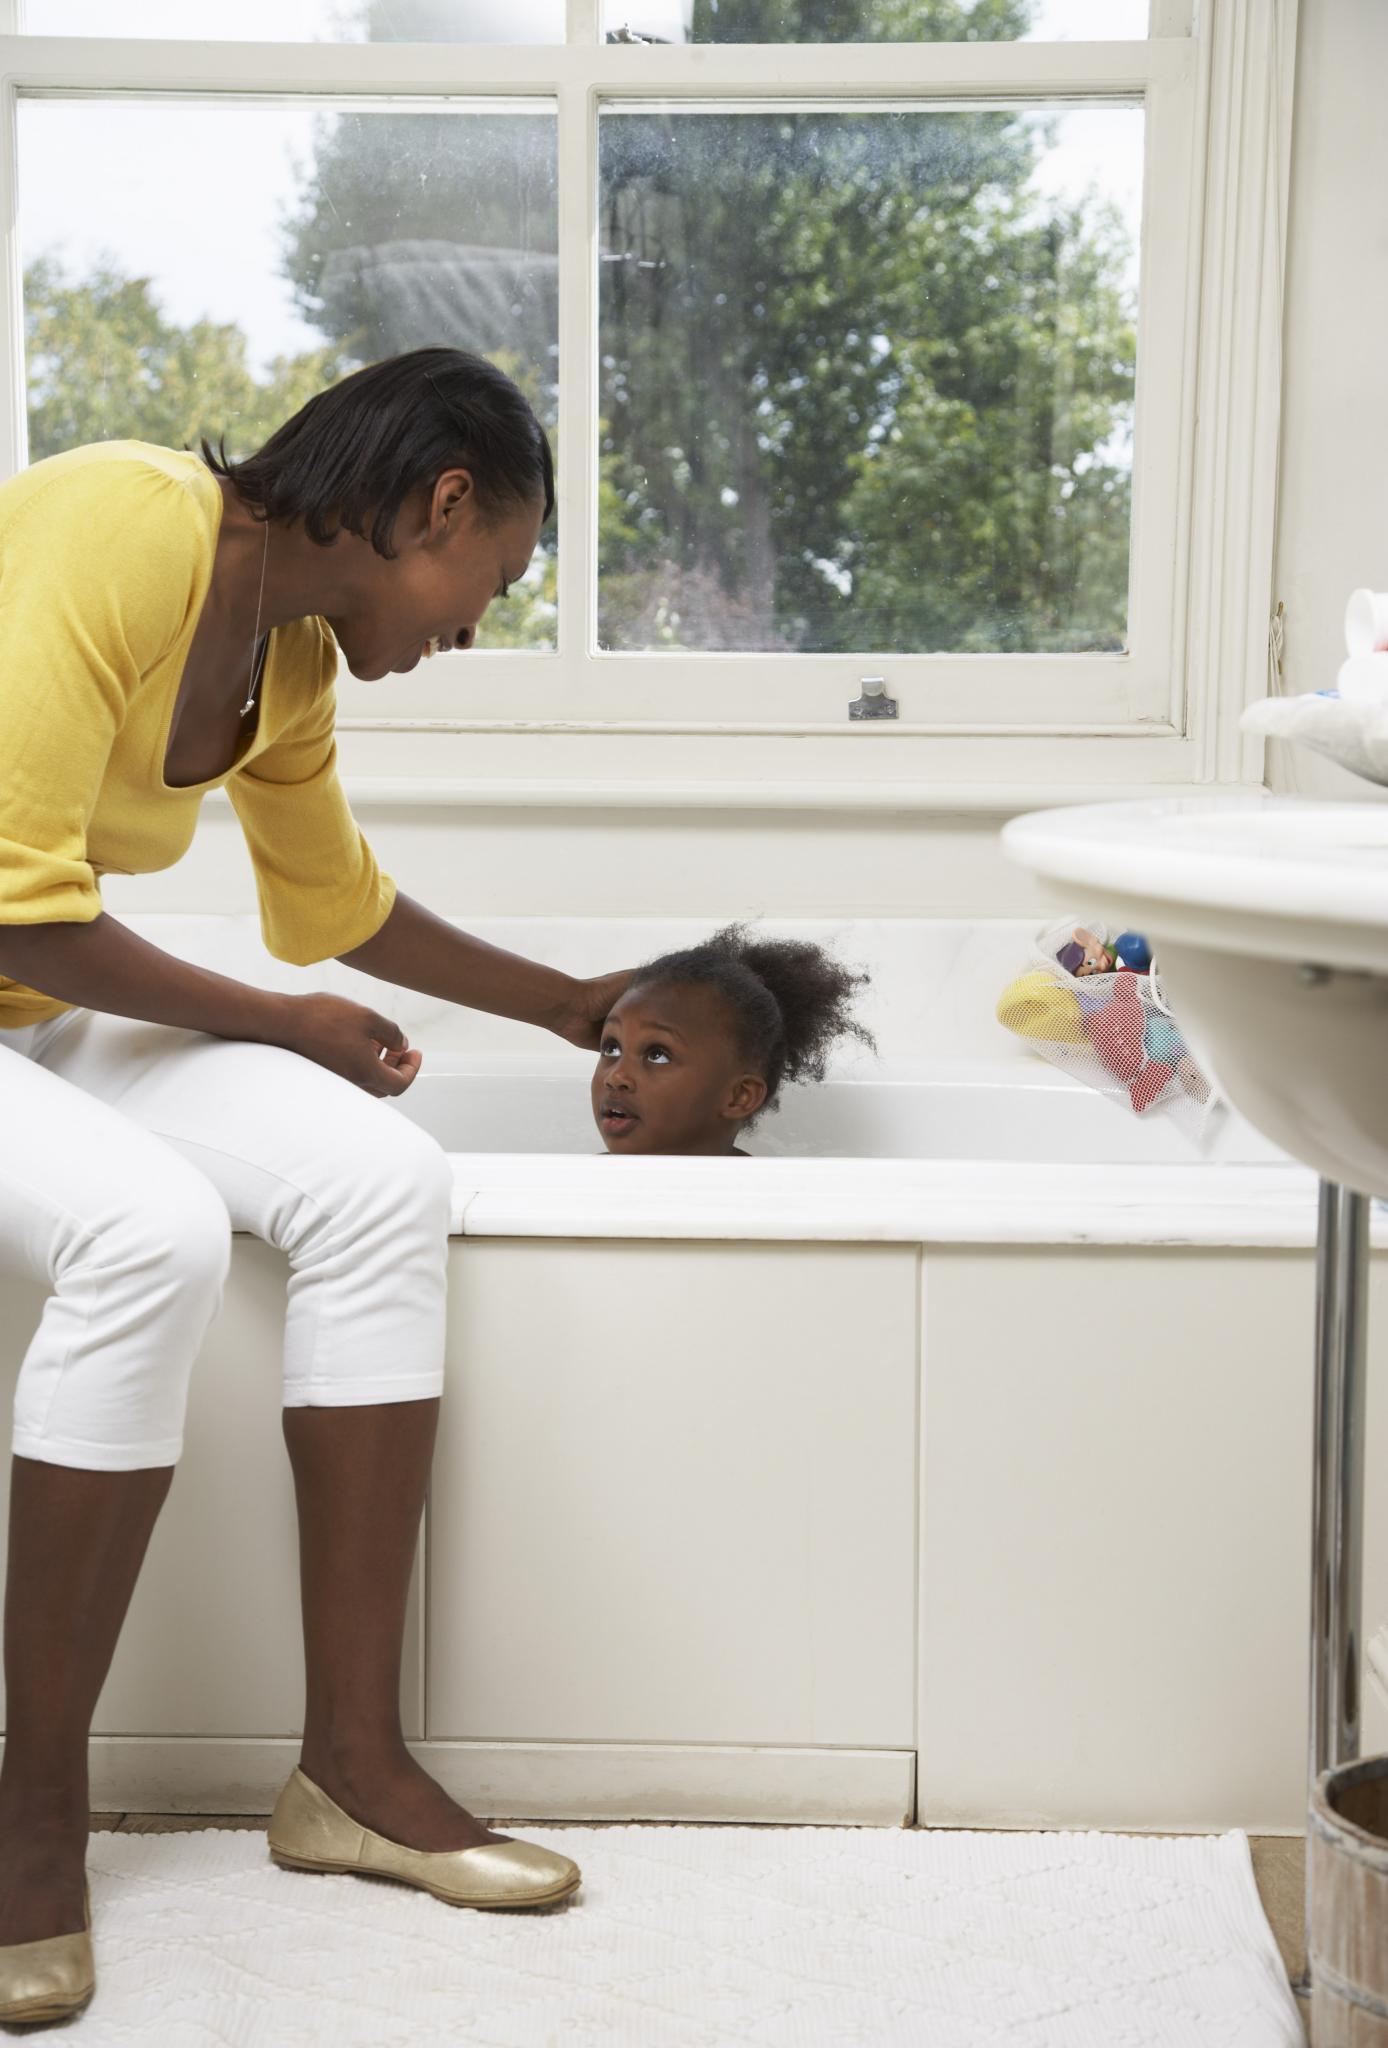 5 Tips for Making Your Child's Wash Day Easier
